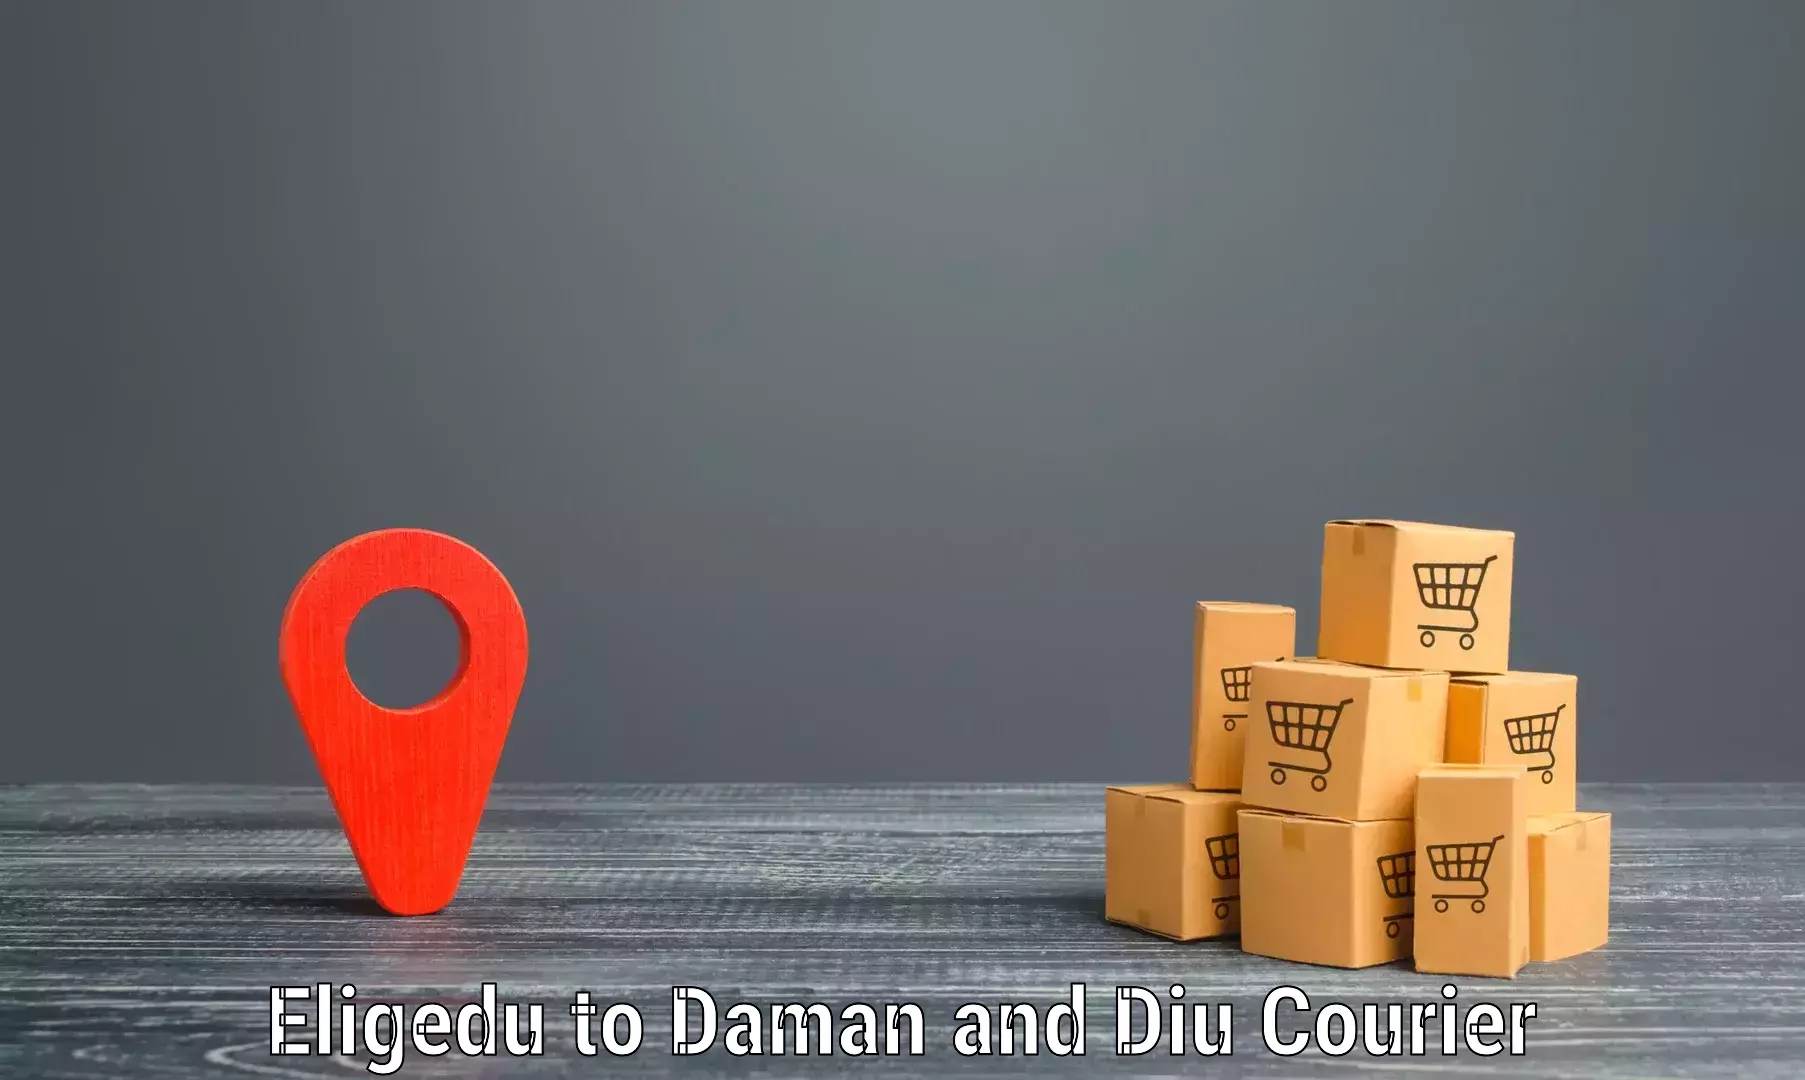 Postal and courier services Eligedu to Diu